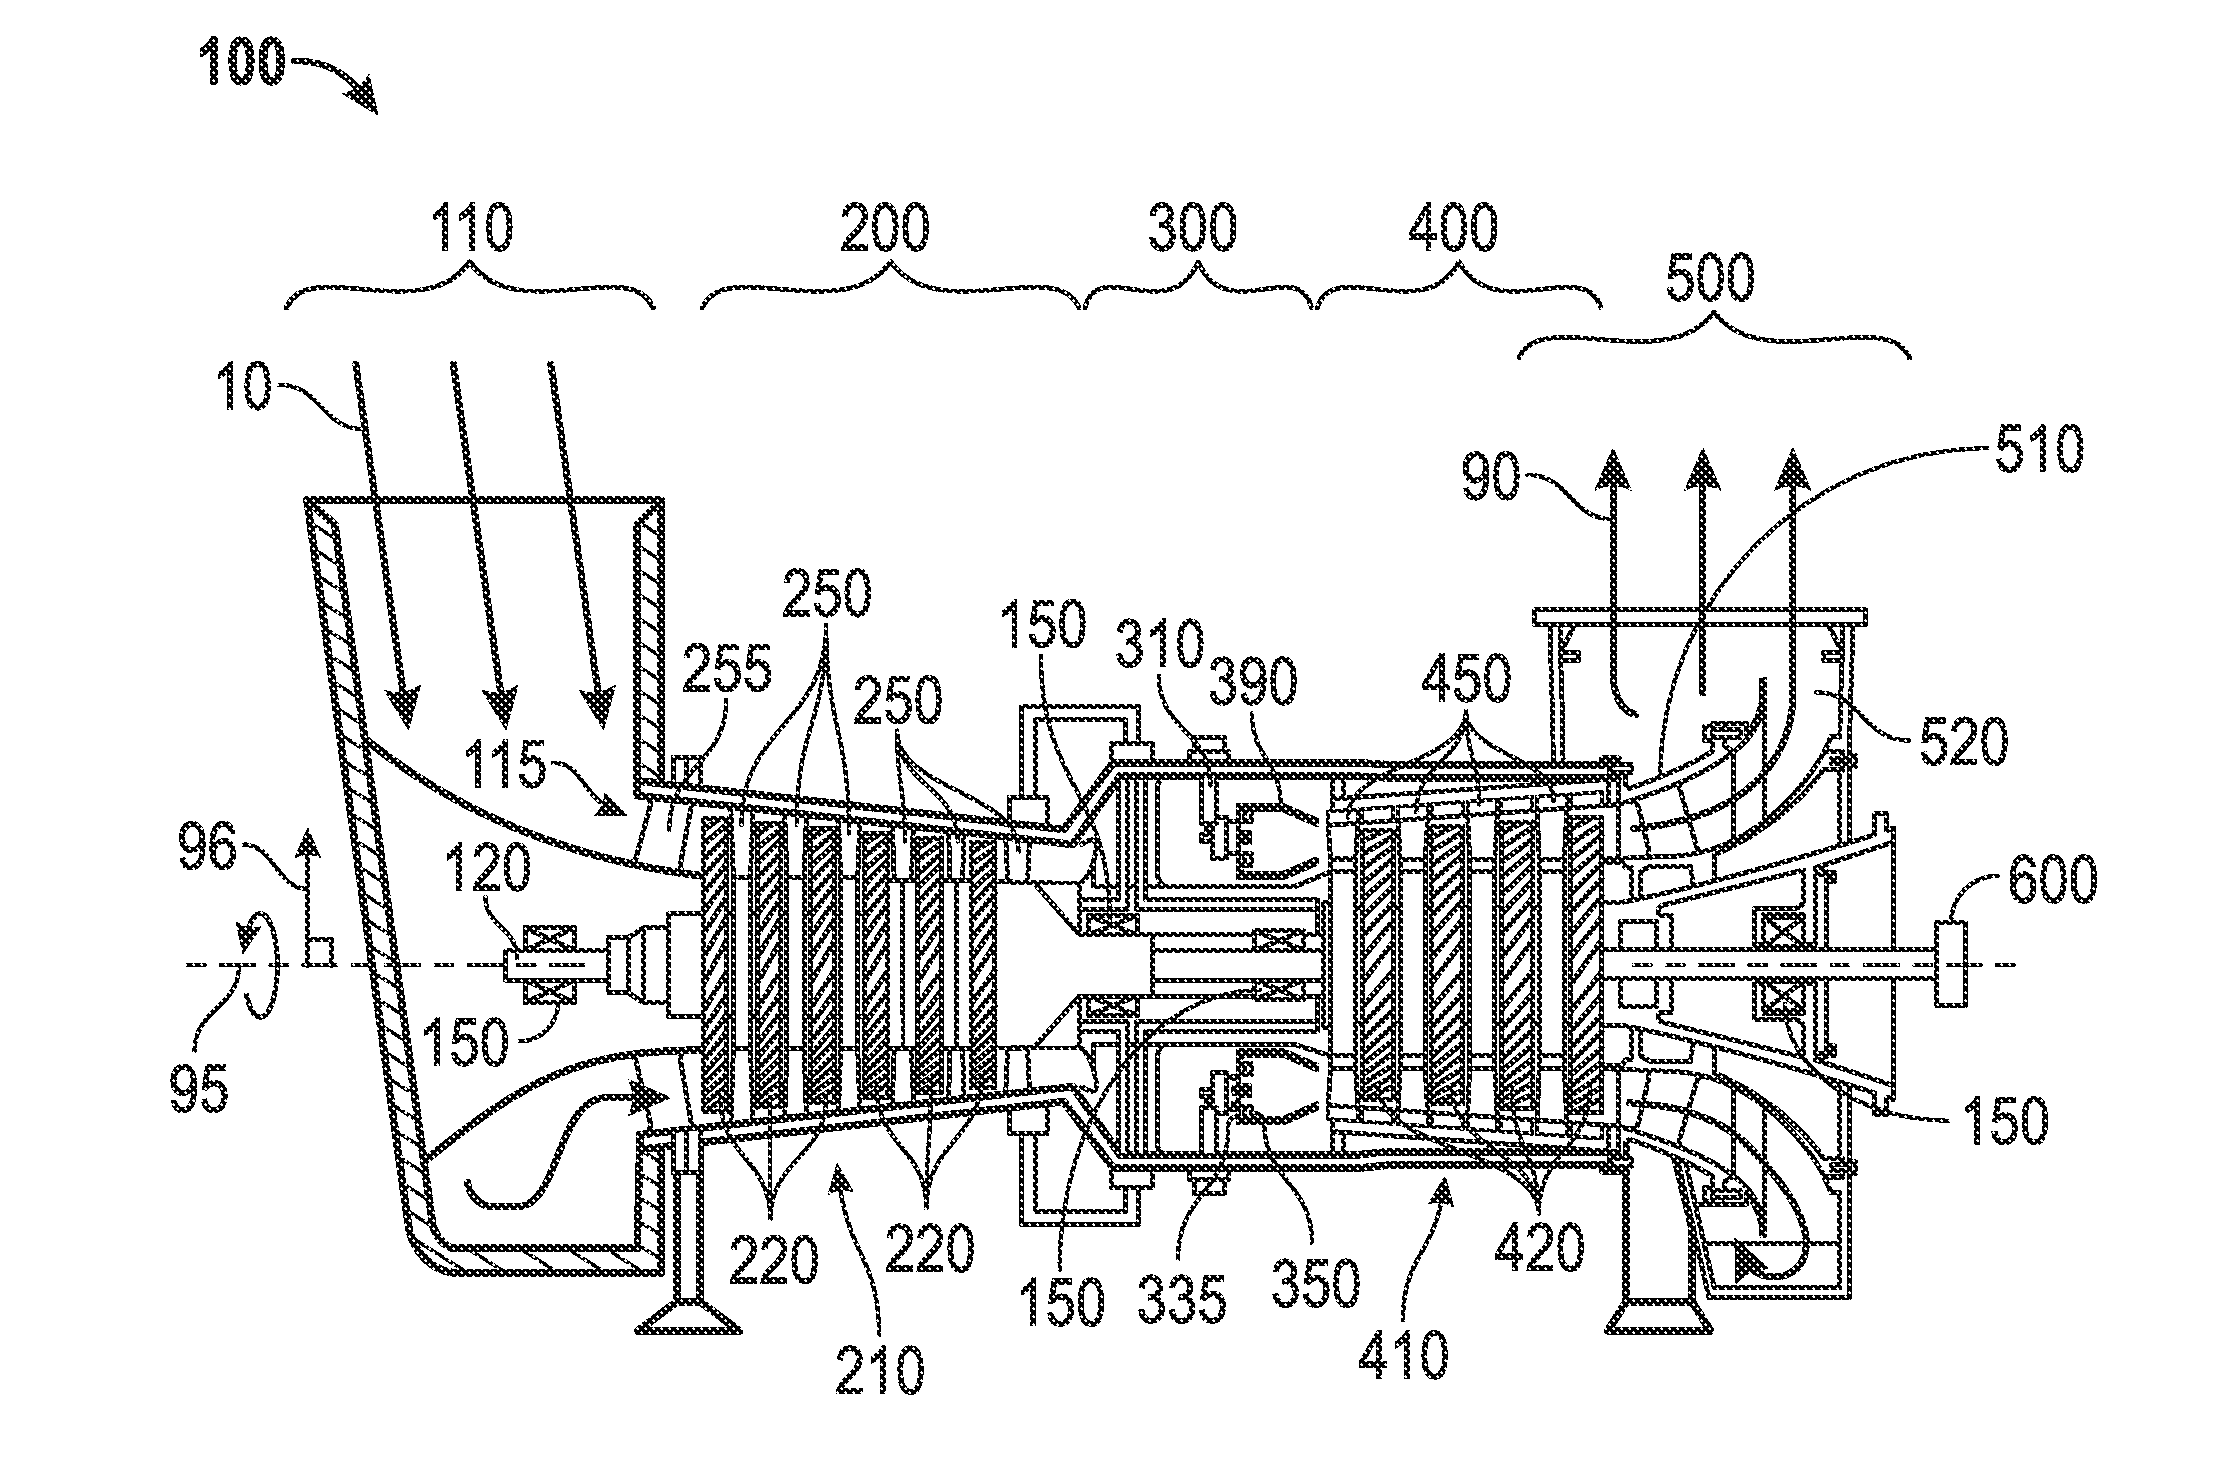 Single crystal turbine blade lifing process and system